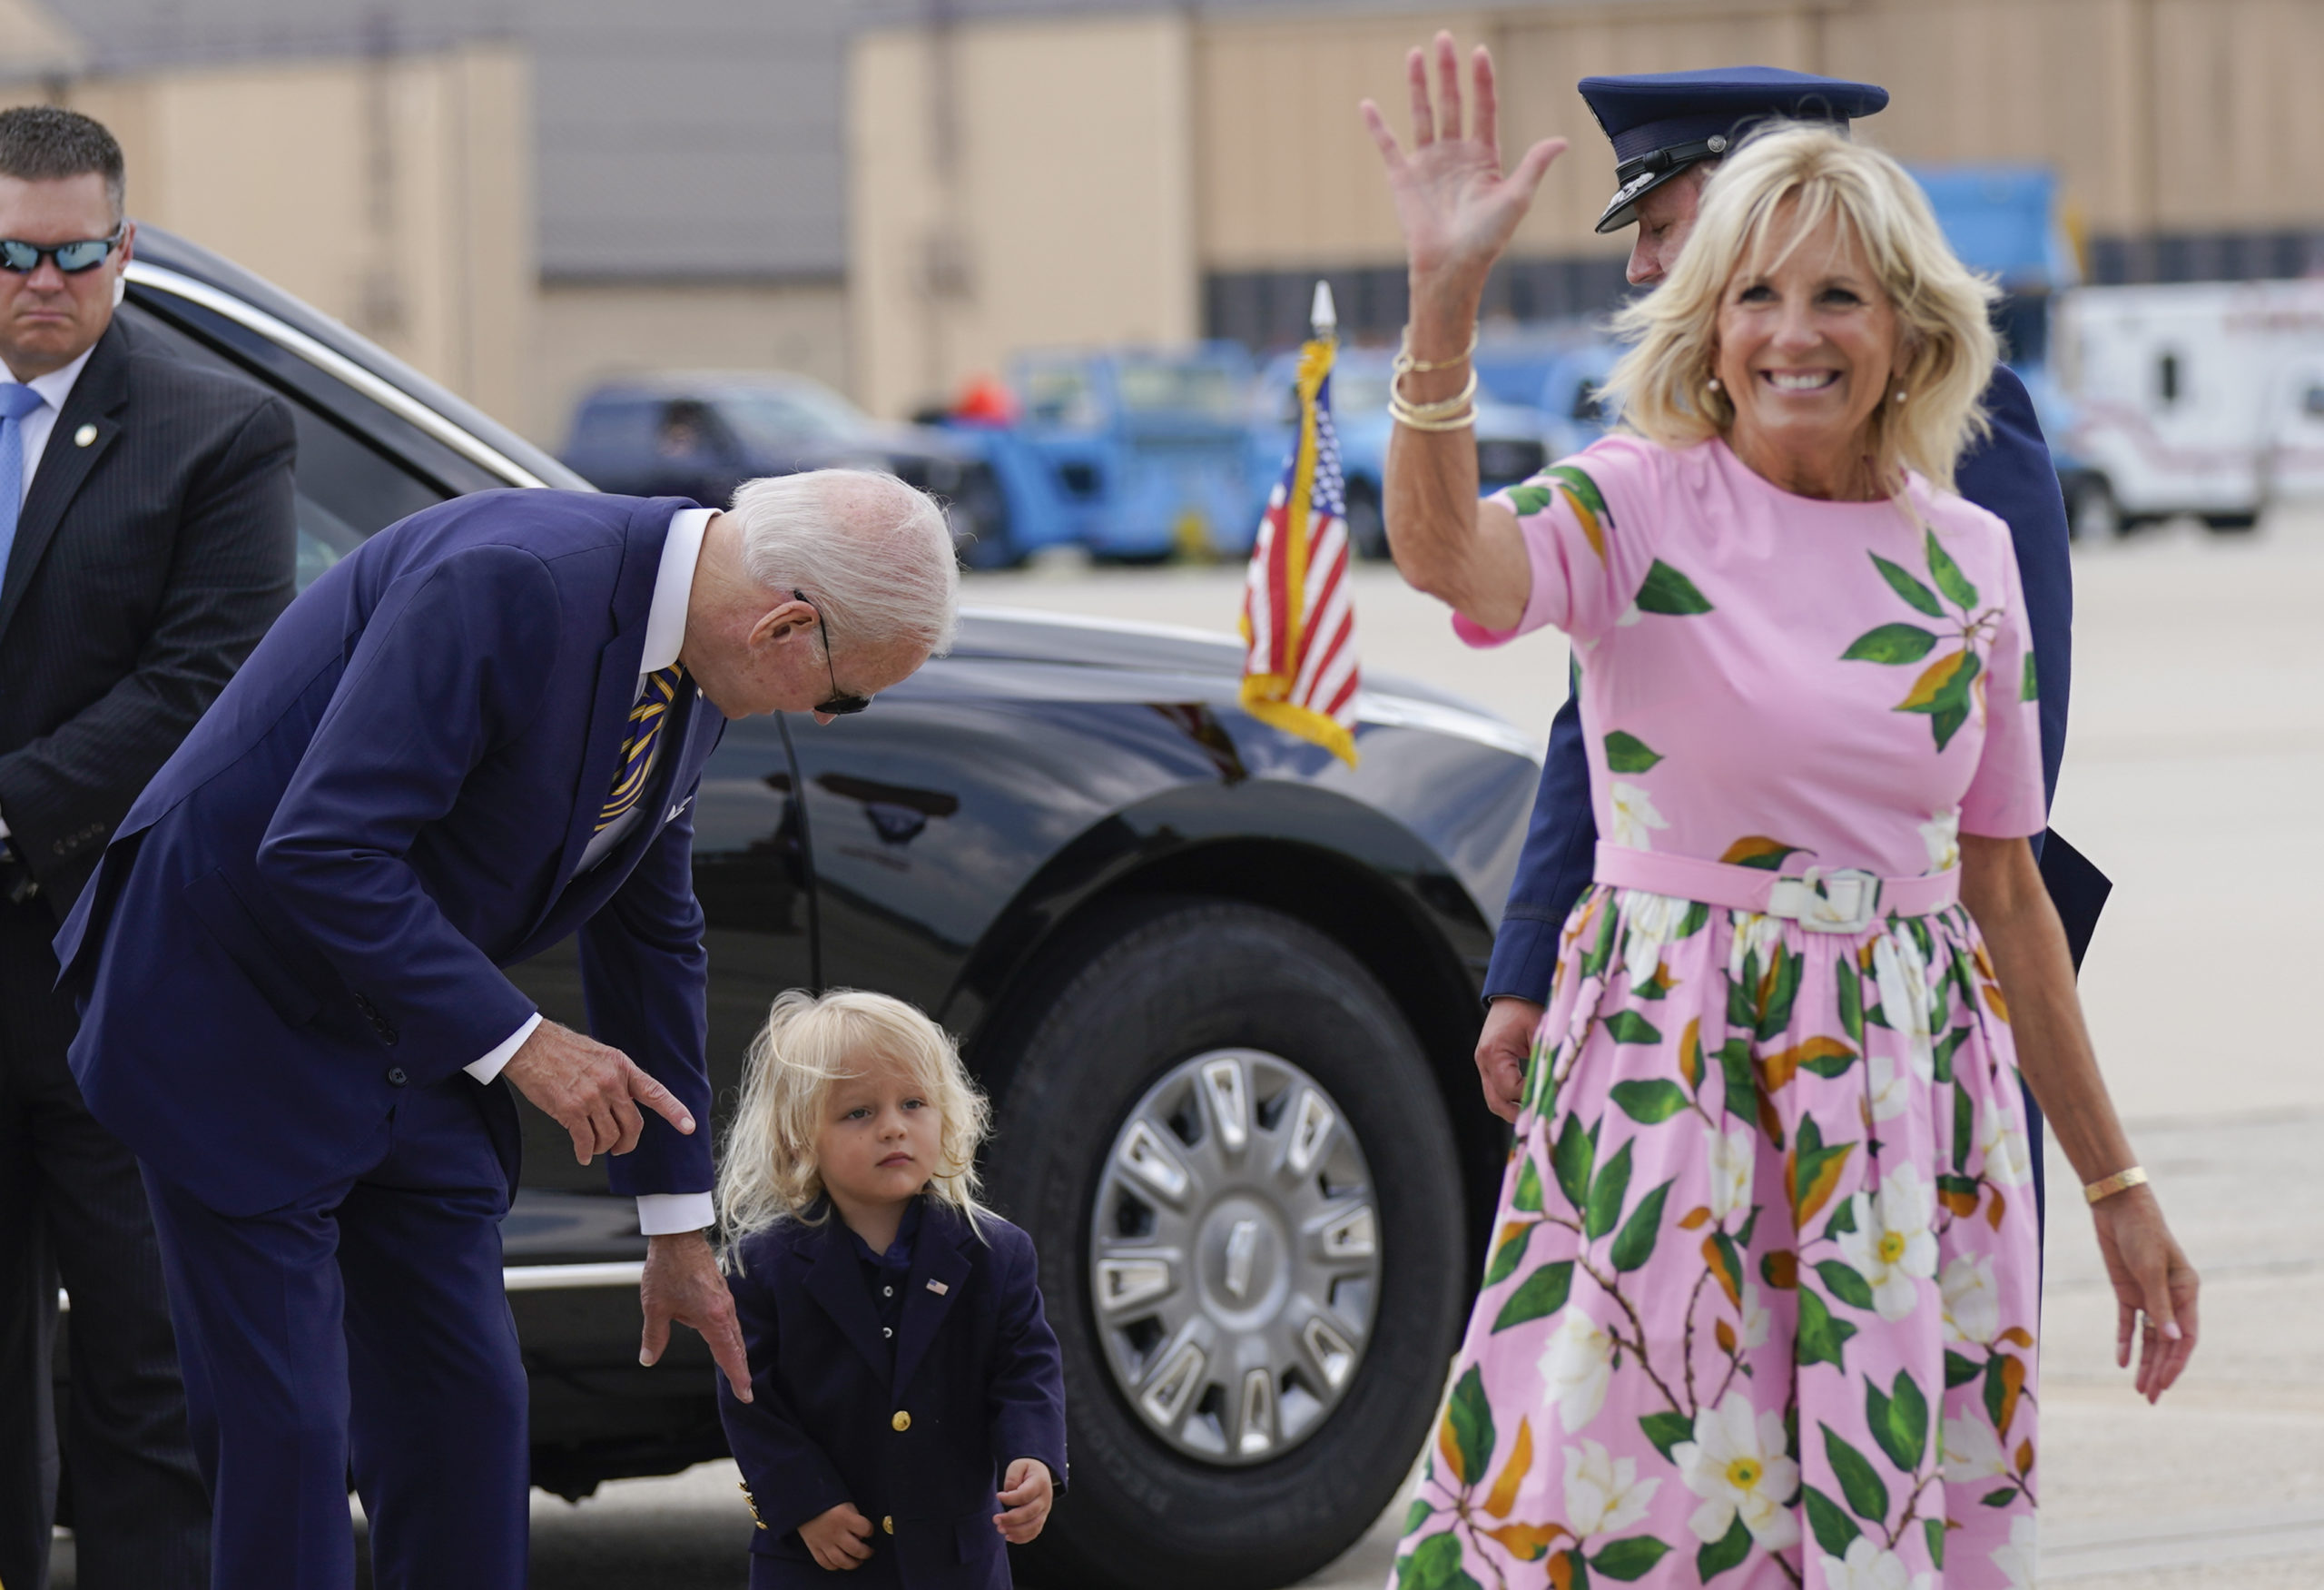 Jill Biden was on vacation in South Carolina when she started experiencing symptoms and tested positive for COVID-19.